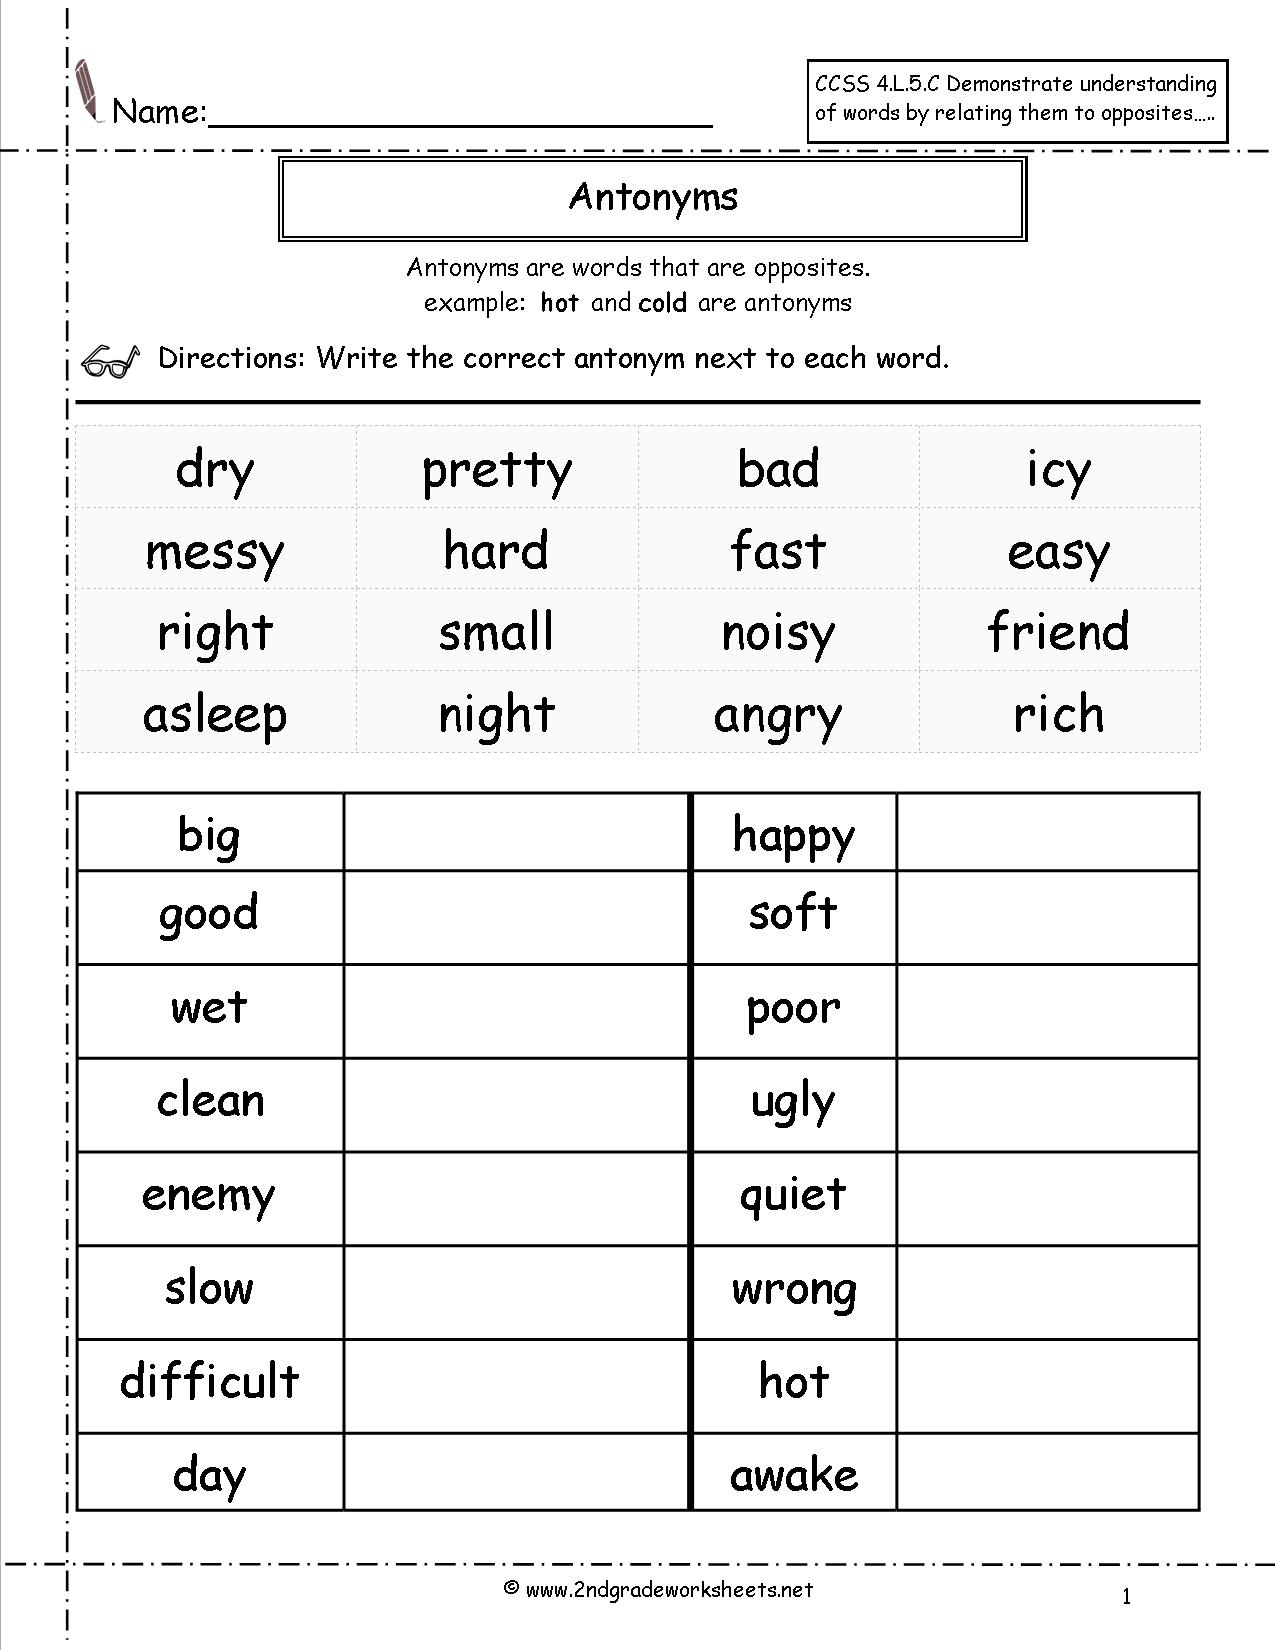 13 Best Images of First Grade Printable Worksheets For ...